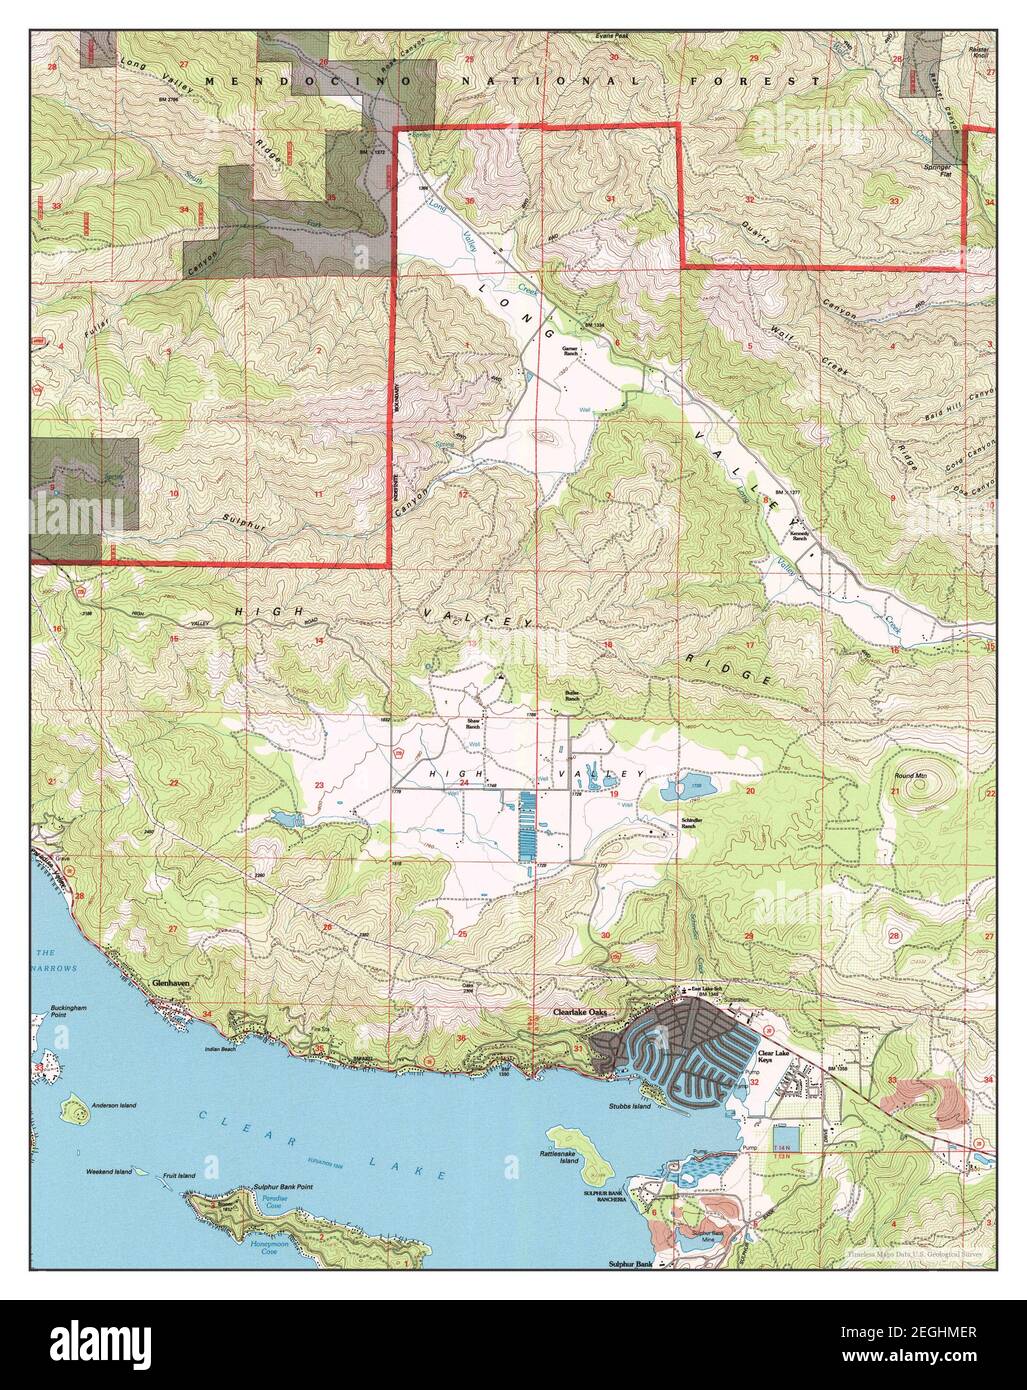 Clearlake Oaks, California, map 1996, 1:24000, United States of America by Timeless Maps, data U.S. Geological Survey Stock Photo